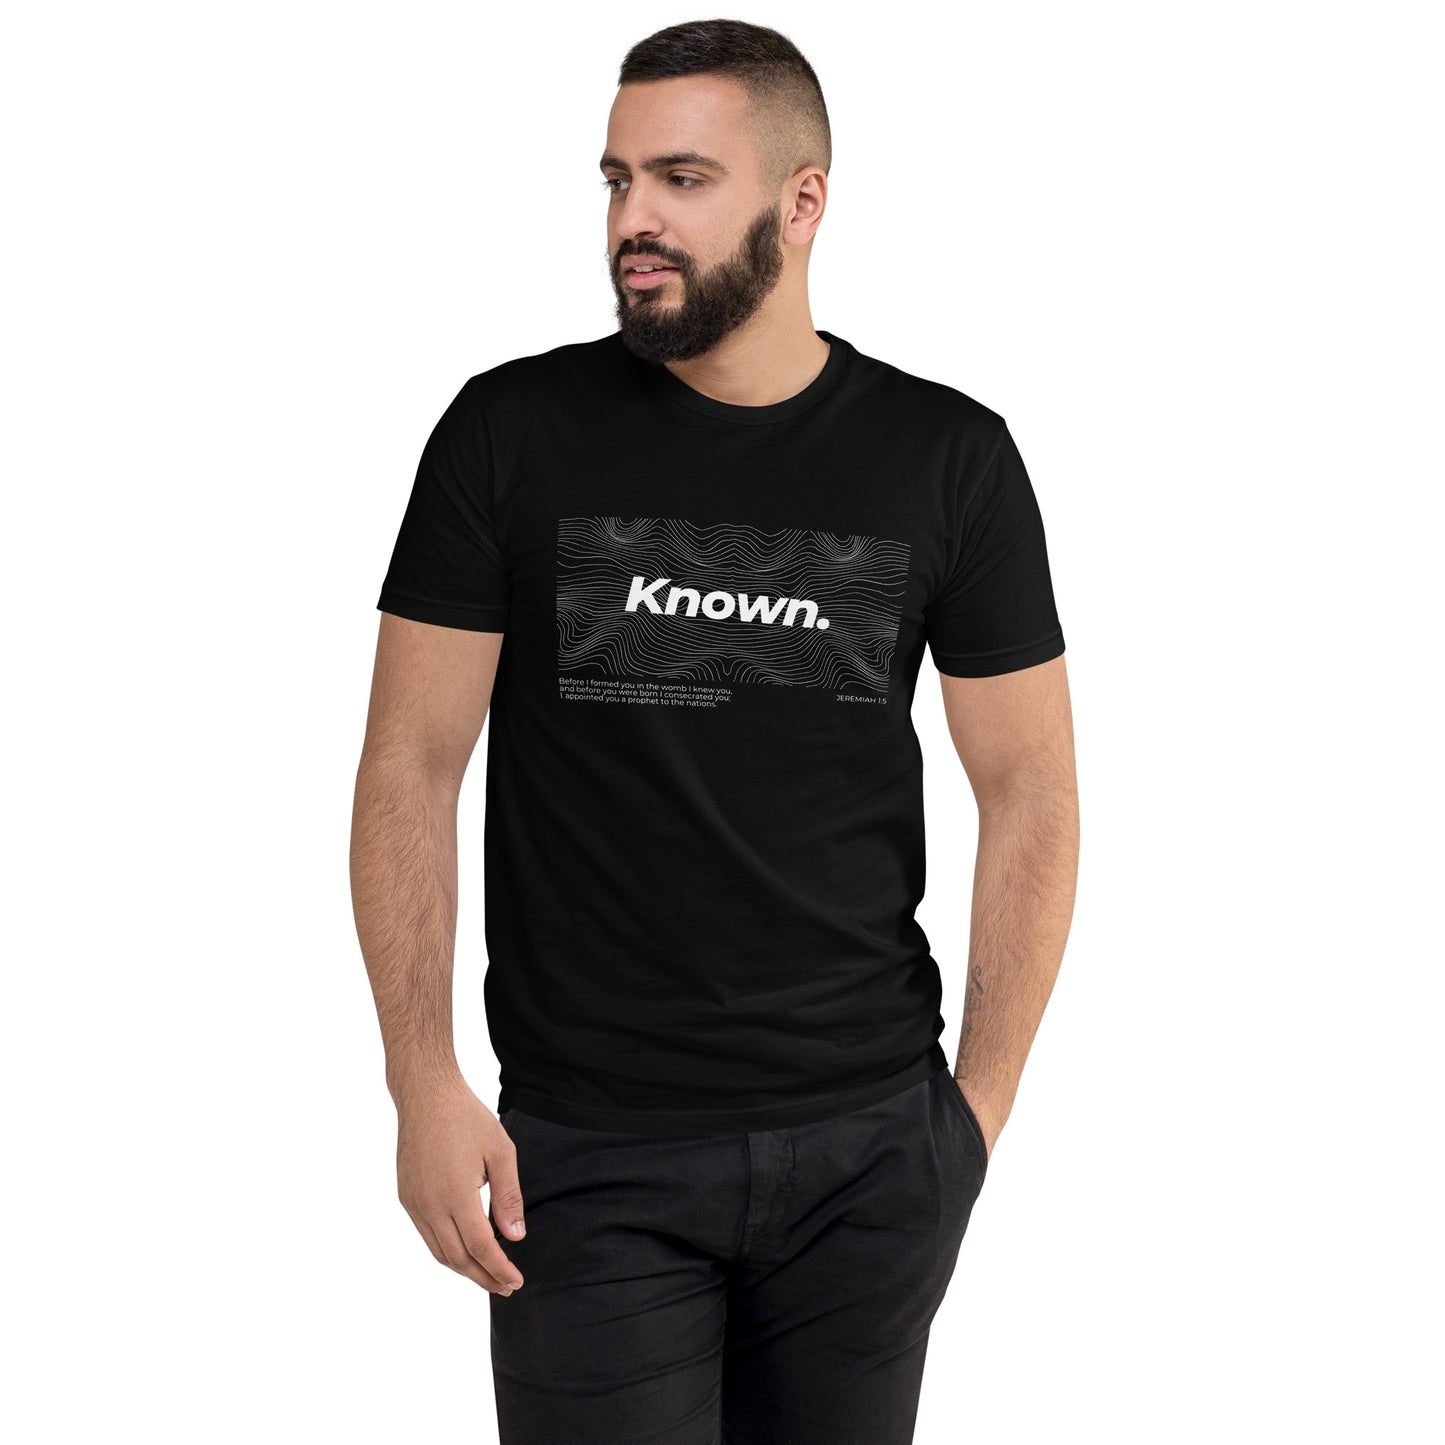 "Known" - Short Sleeve T-shirt